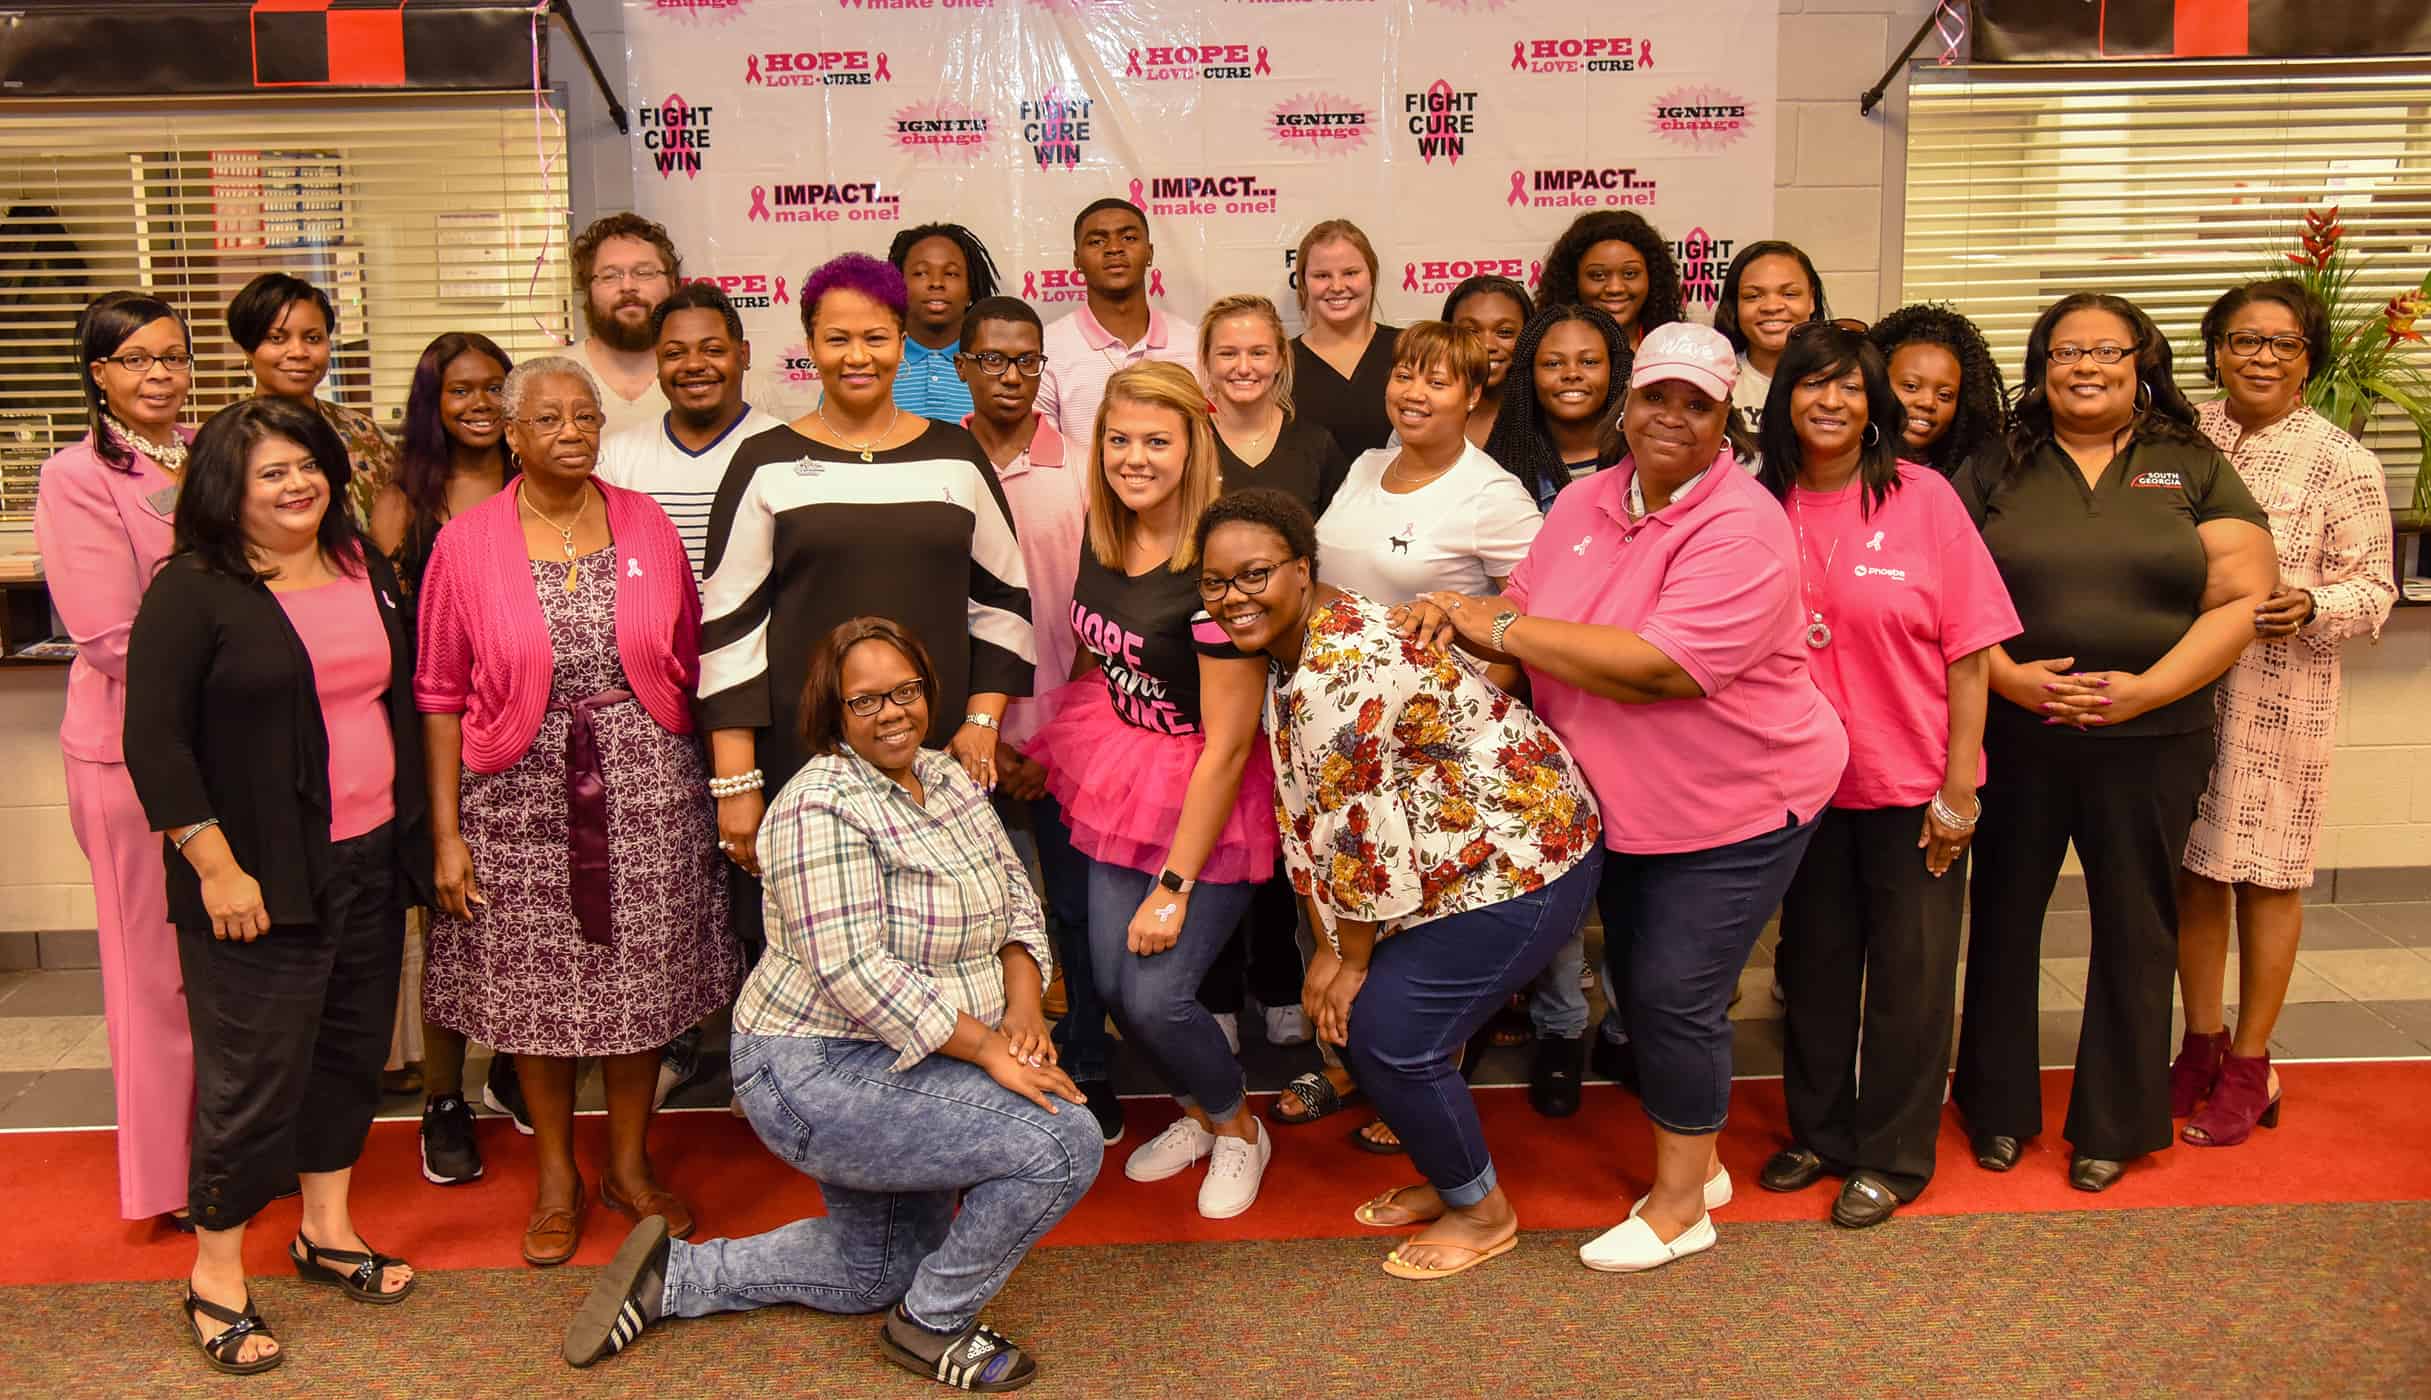 A group of 27 people, many wearing pink, stand together for a picture.